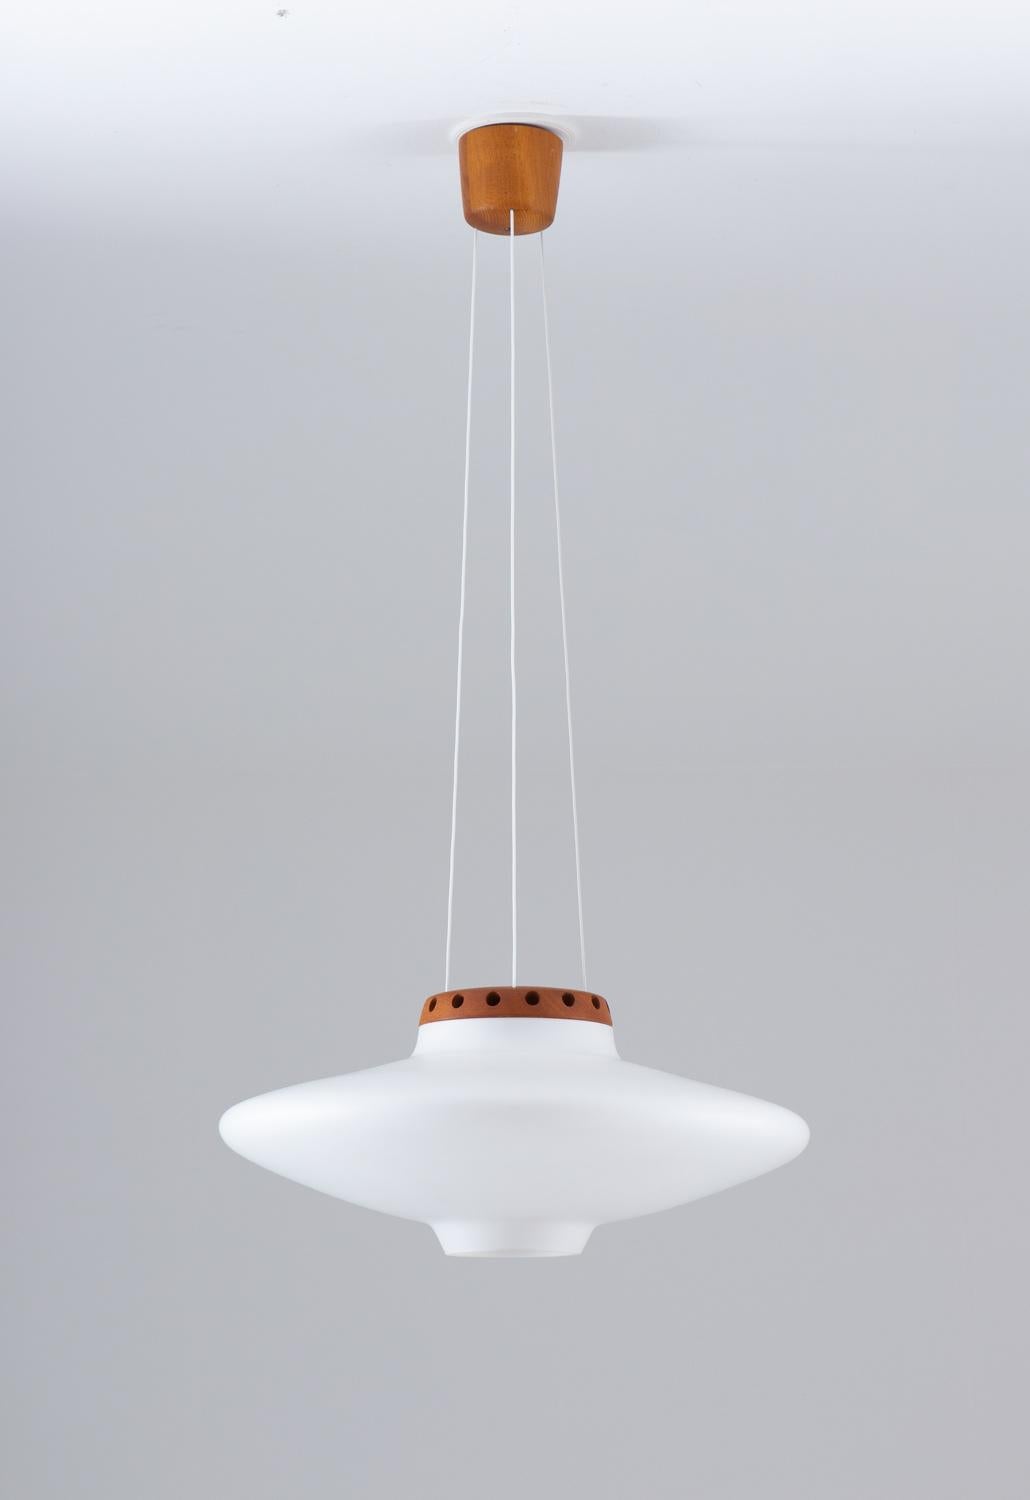 A pendant by Uno and Östen Kristiansson for Luxus, 1950s. This lamp features a large sphere in frosted opaline glass, held by a teak piece with small holes around it that lets the light out in a beautiful way against the ceiling. Three wires are